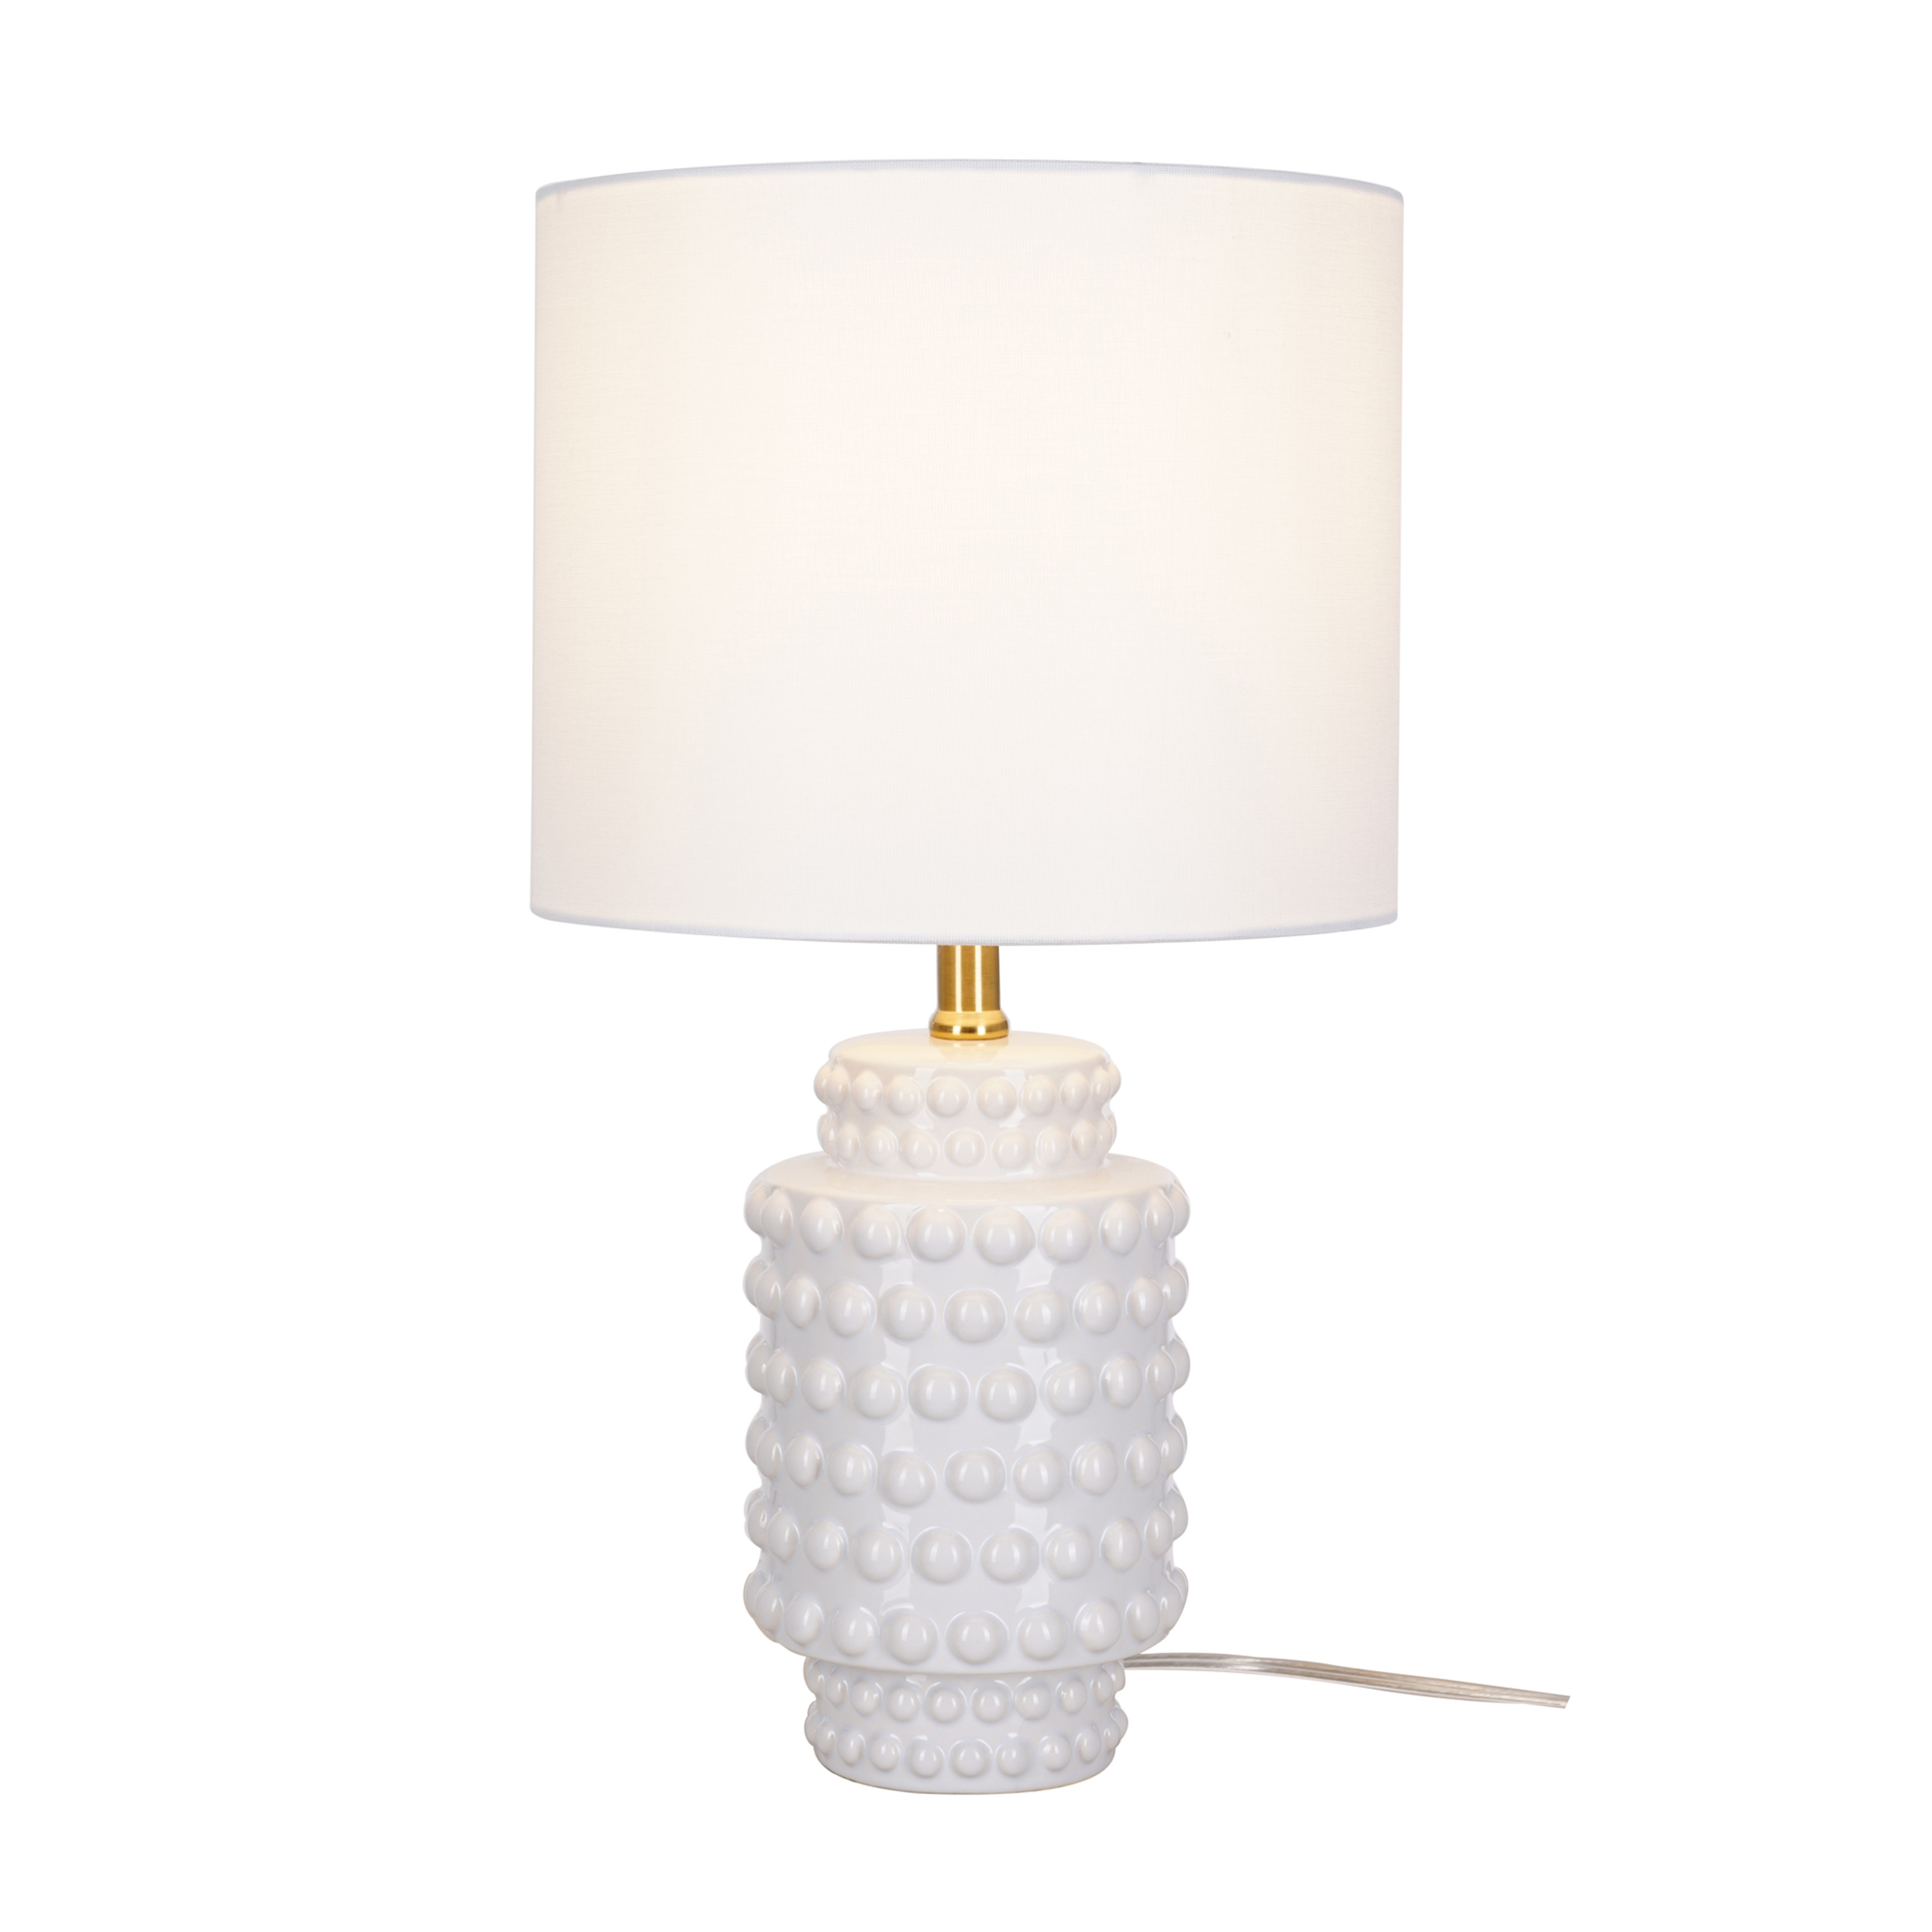 My Texas House 21" Hob-Nail Ceramic Table Lamp, Brass Accents, White Finish, LED Bulb Included - image 5 of 8